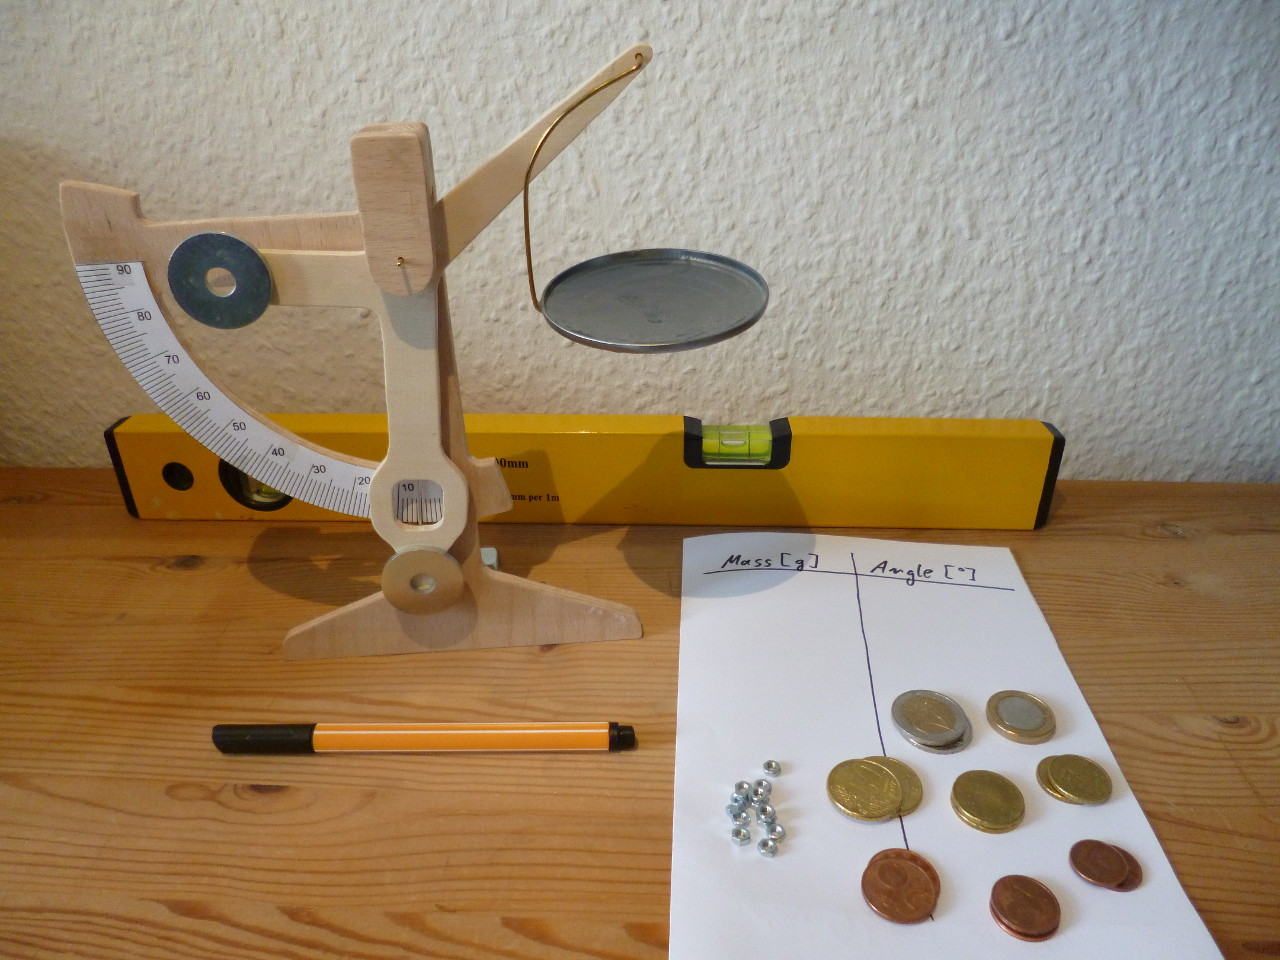 DIY Weighing Machine : 8 Steps (with Pictures) - Instructables